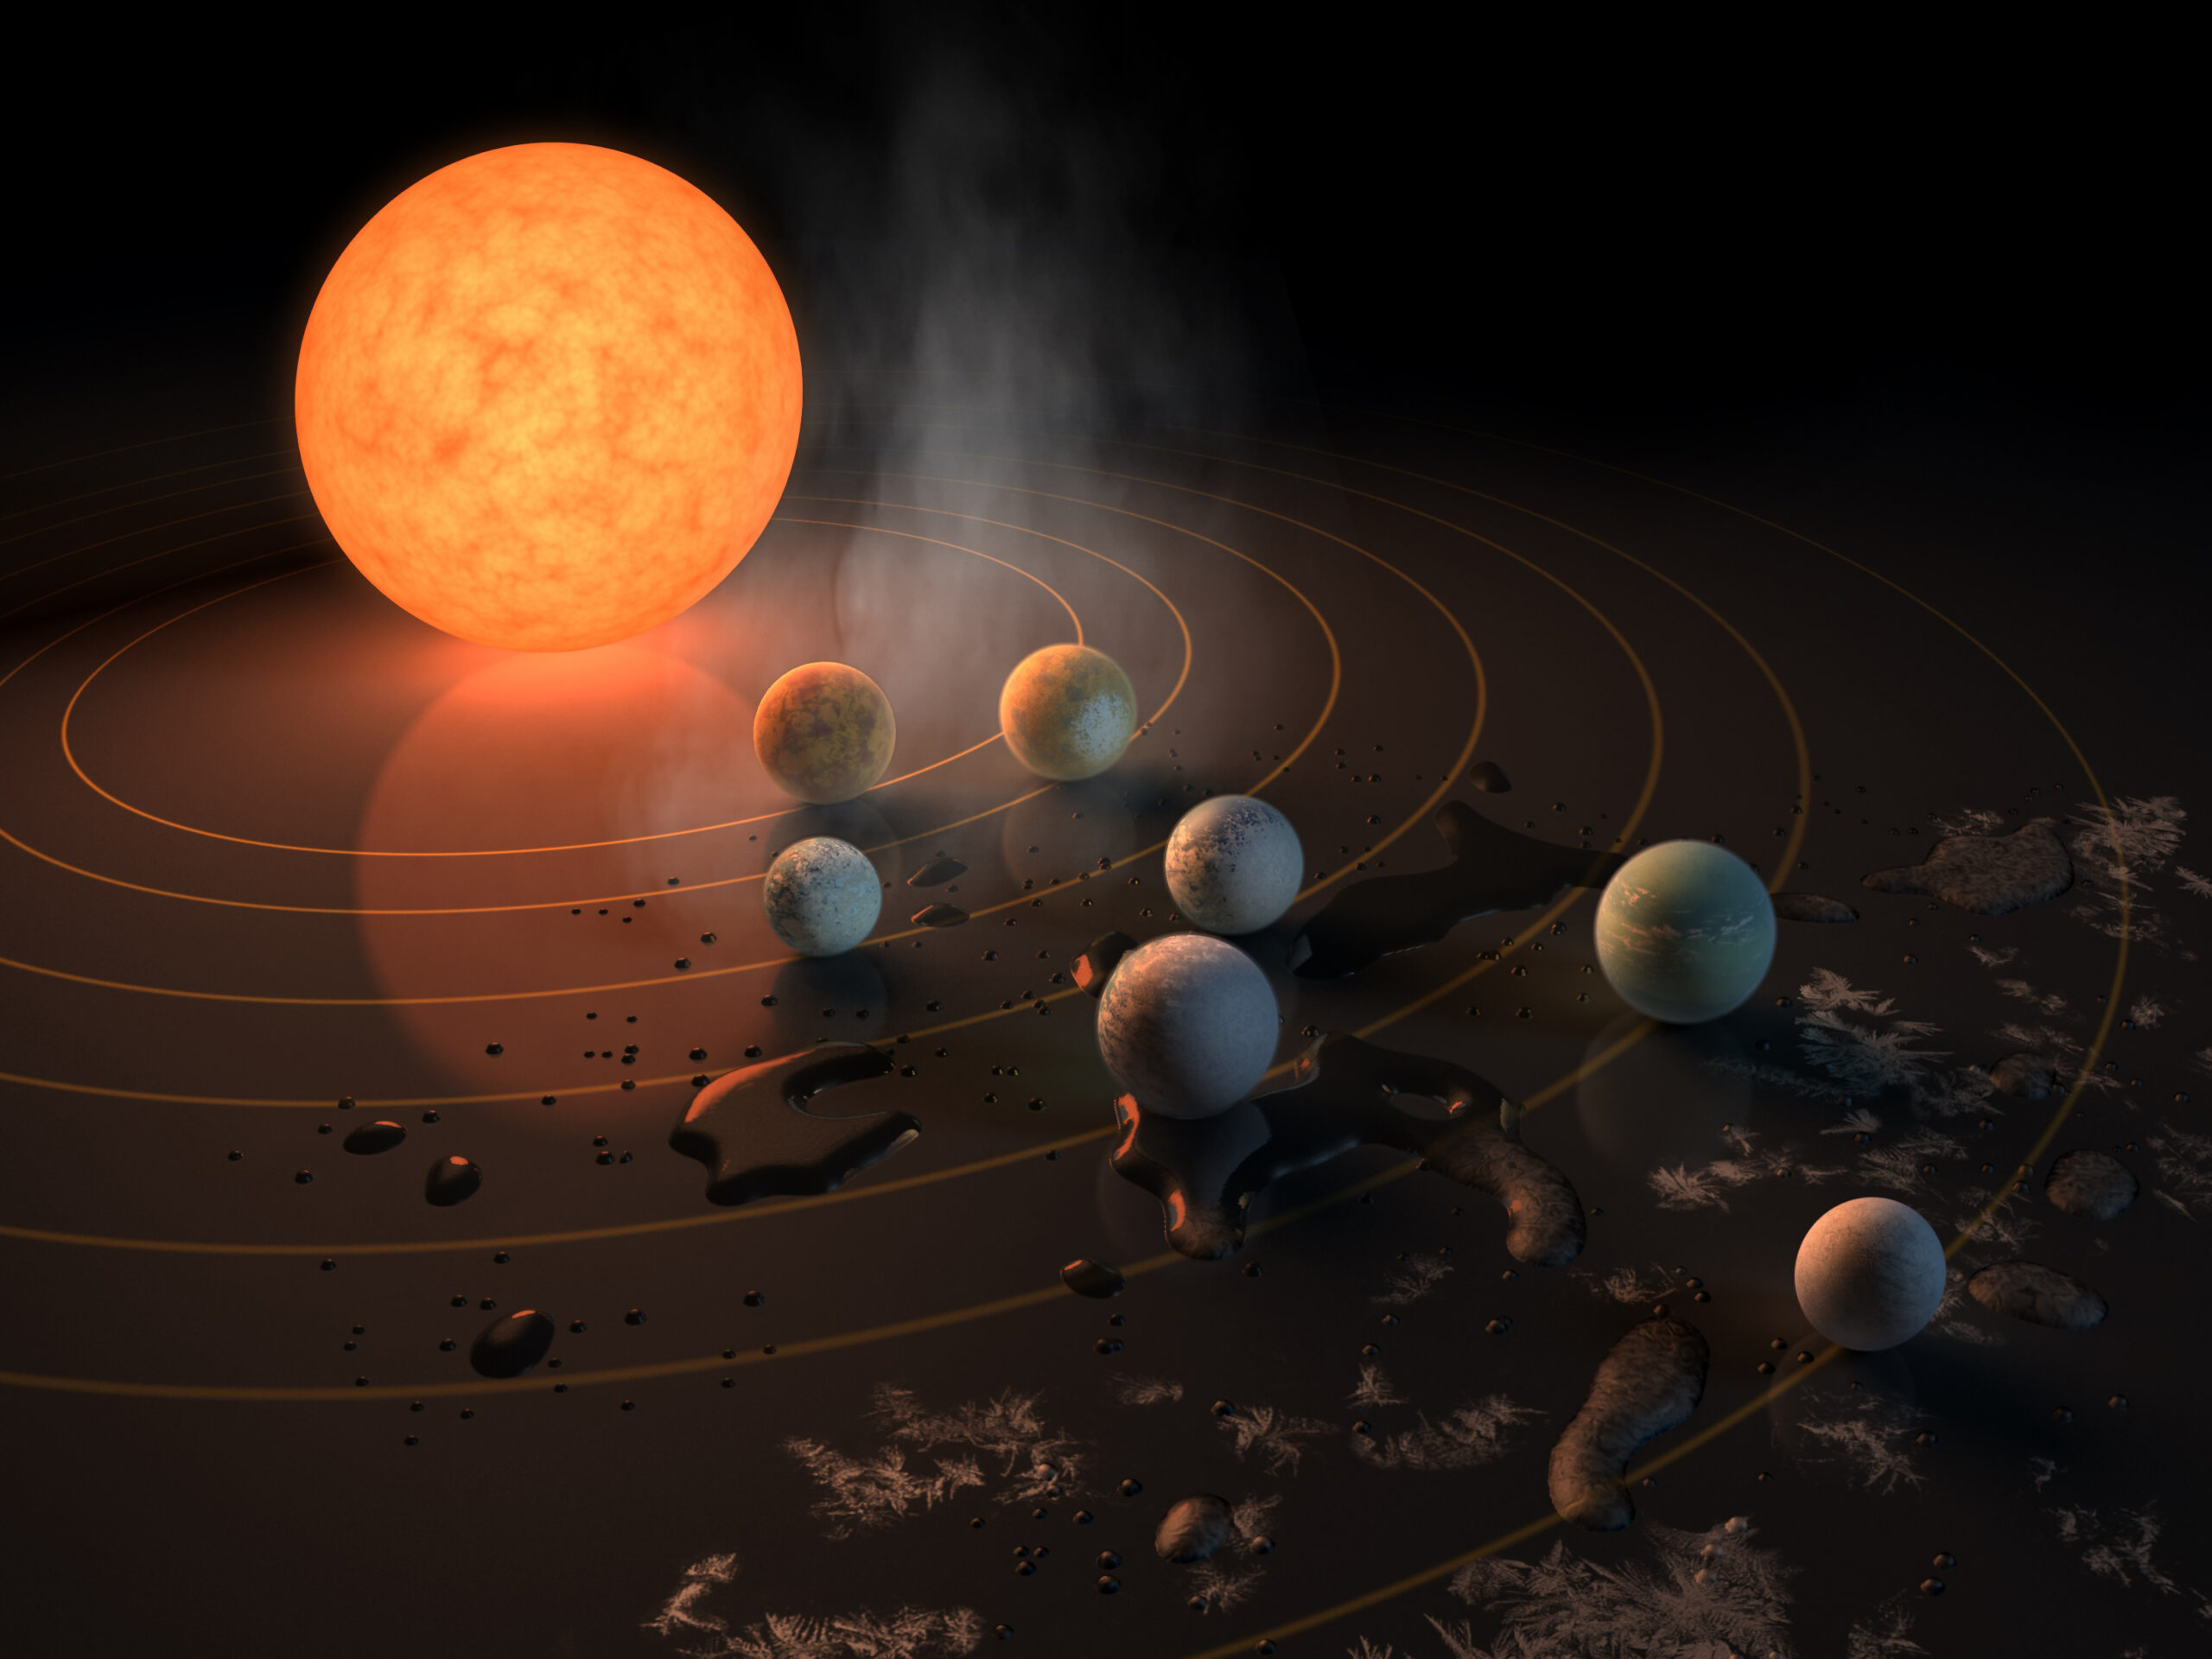 7 planets in the trappist-1 solar system